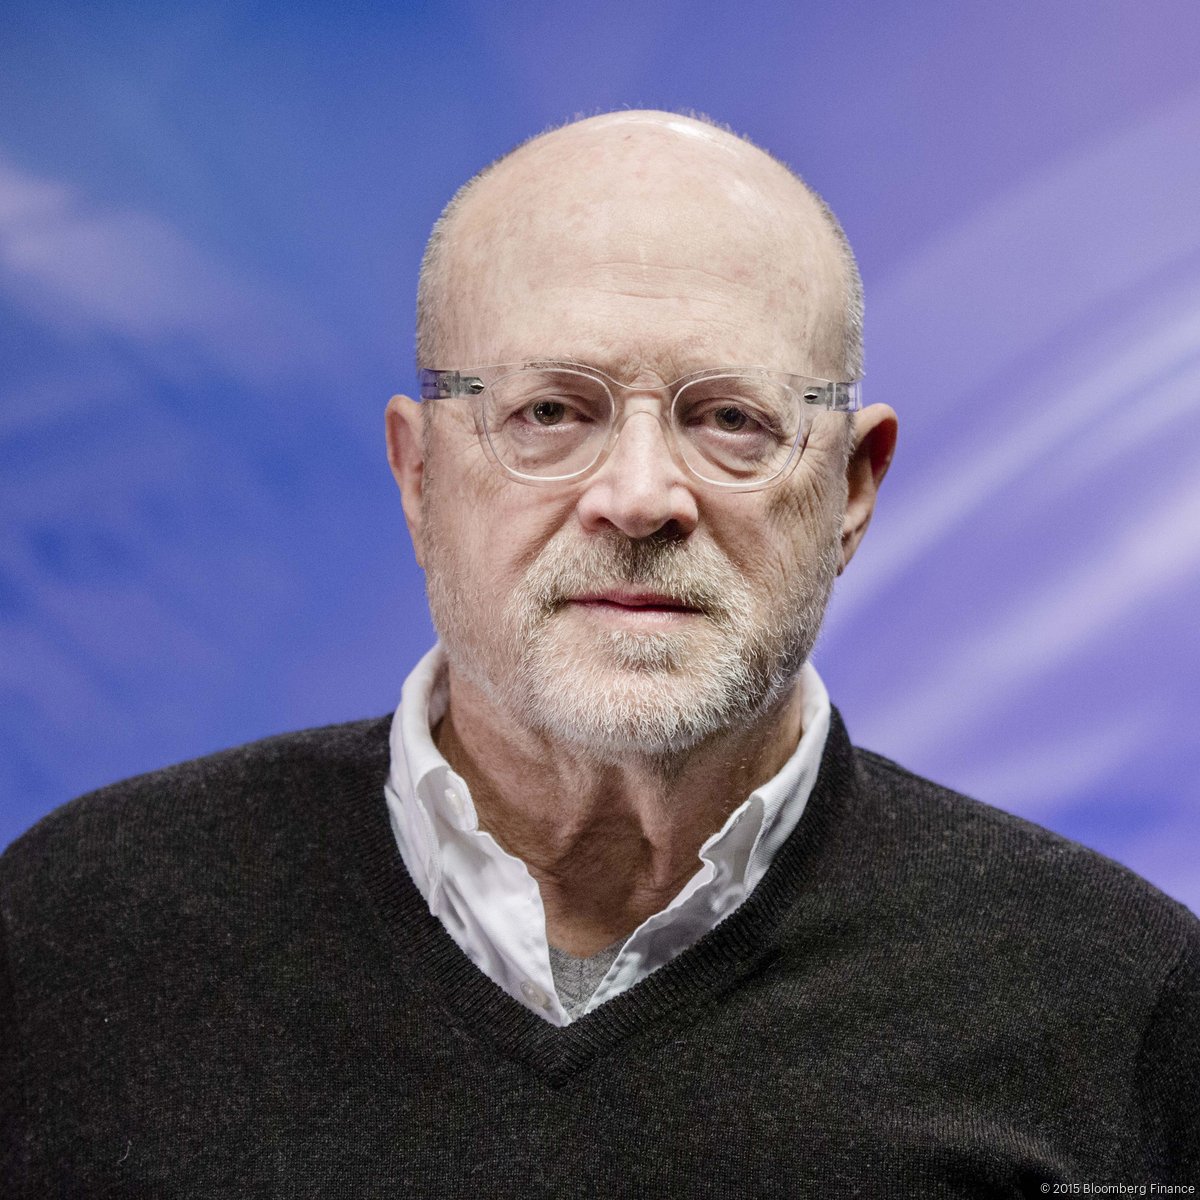 8-astonishing-facts-about-mickey-drexler